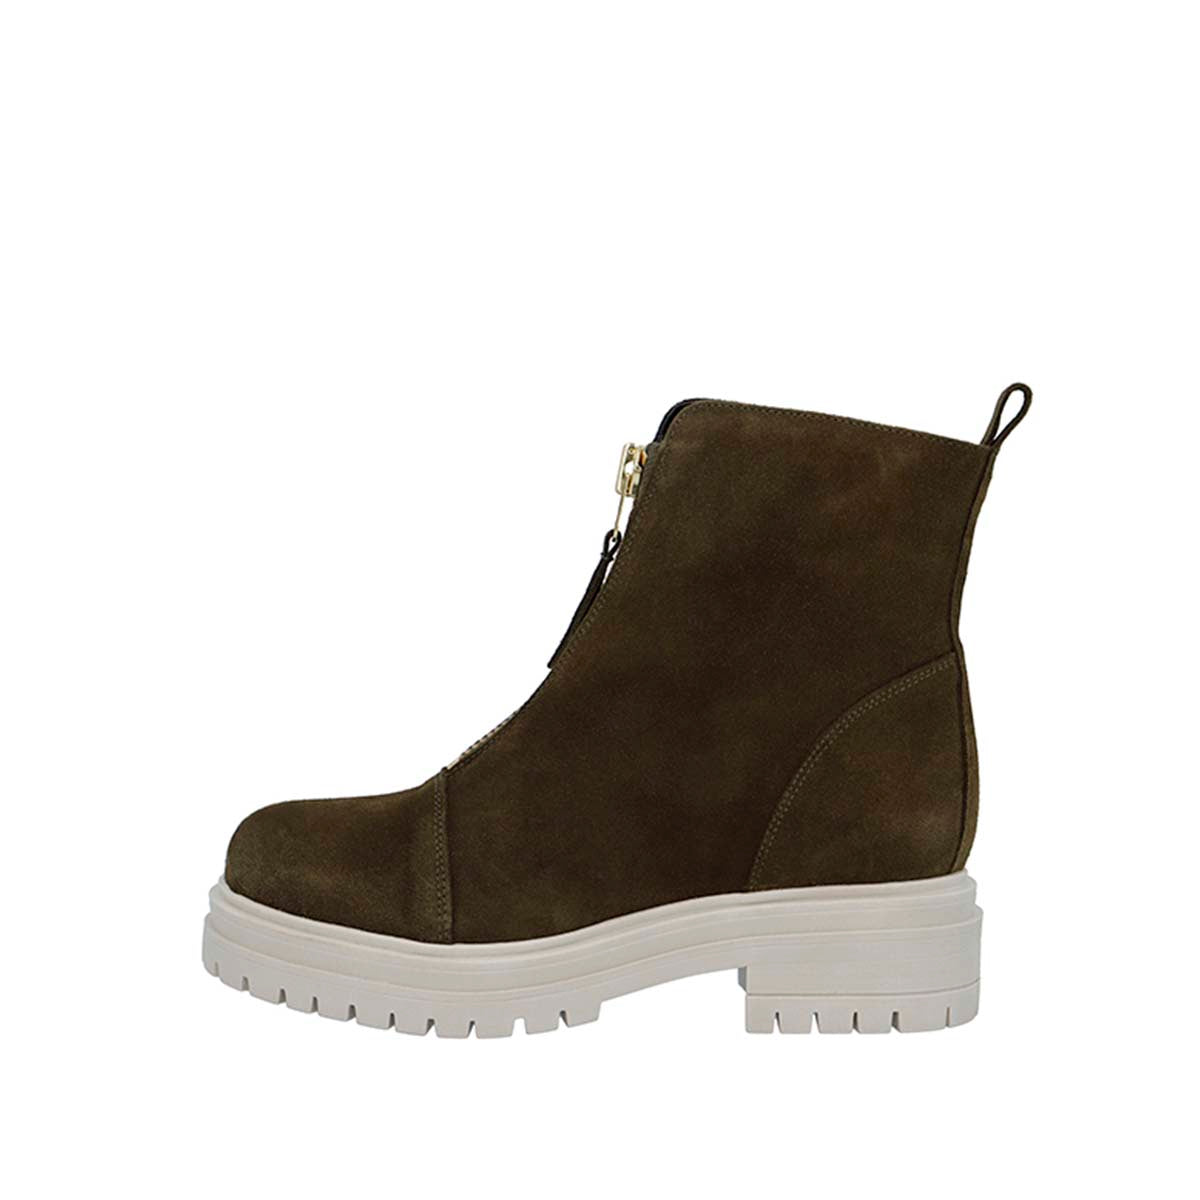 CASHOTT CASHANNAH Front Zipper Boot Ankle Boots Olive suede/ Off white sole 276